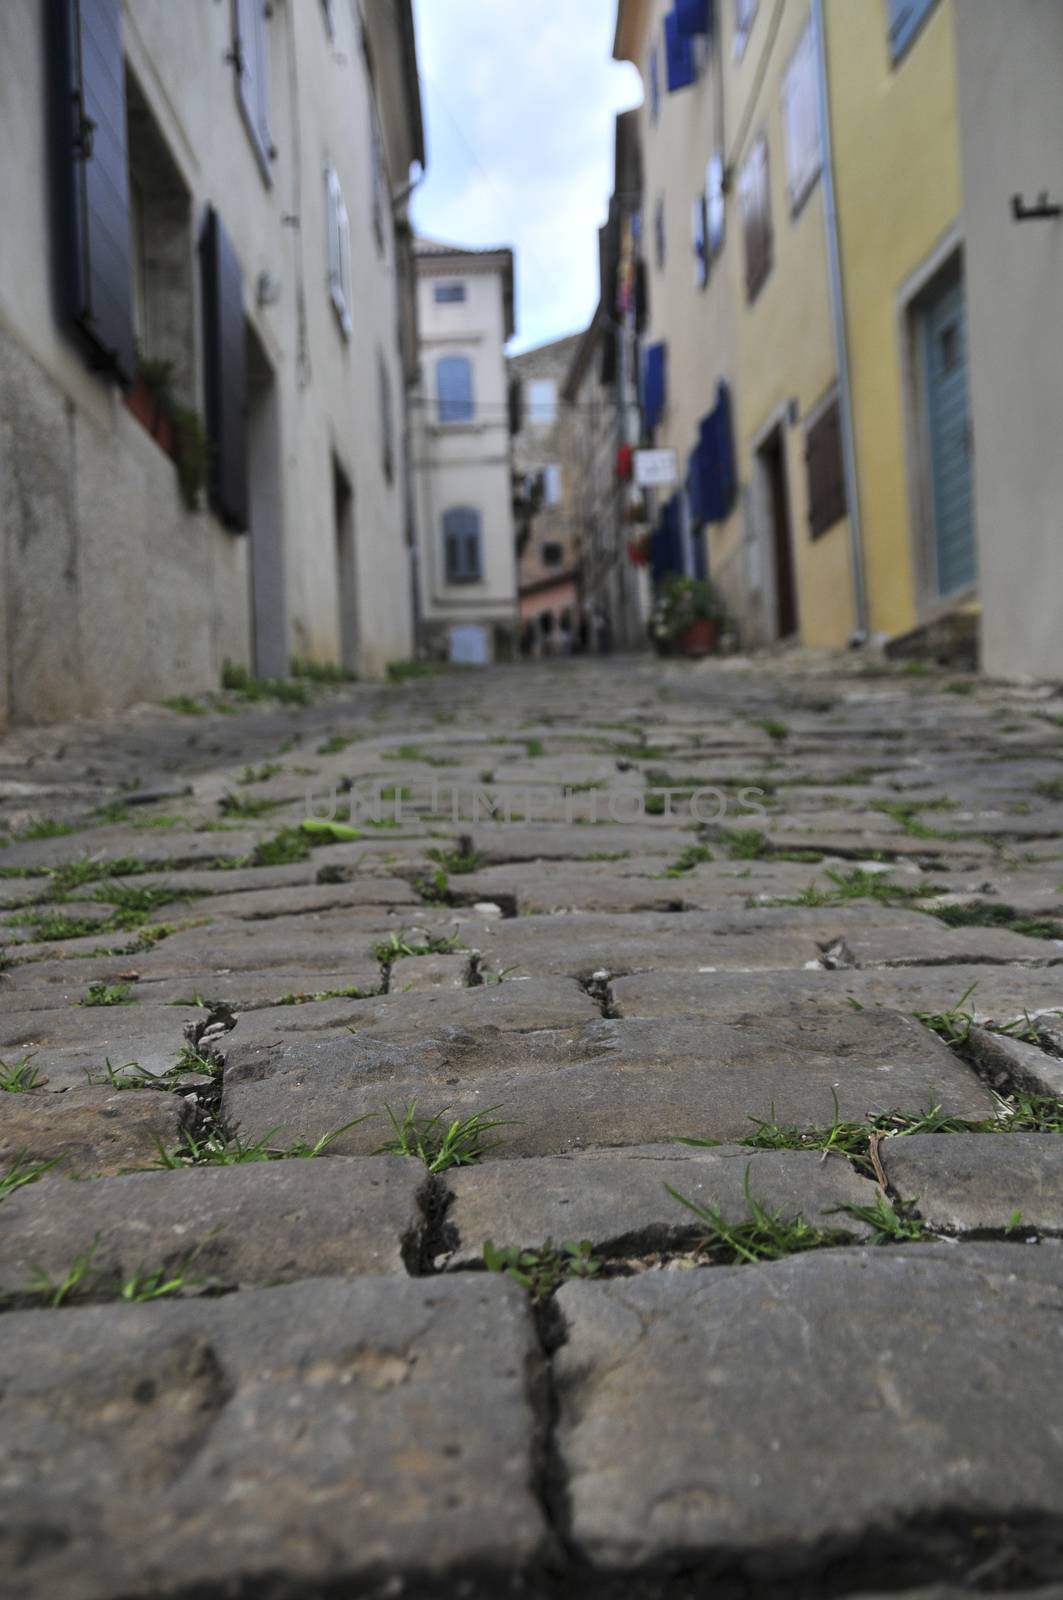 Old paved street in ancient town by asafaric